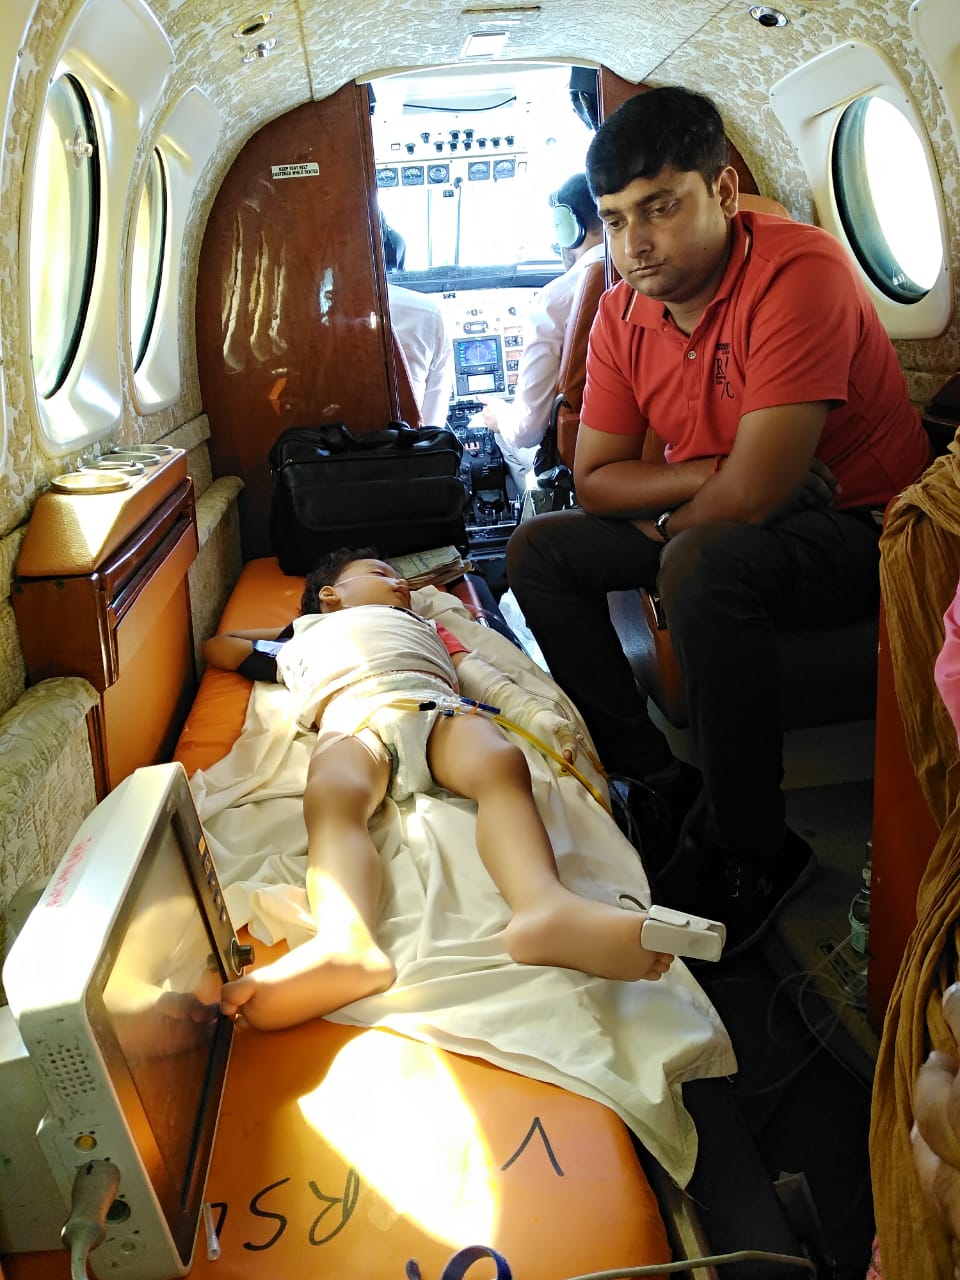 Emergency Medical King Air Ambulance Services in India with Top Doctors Facility